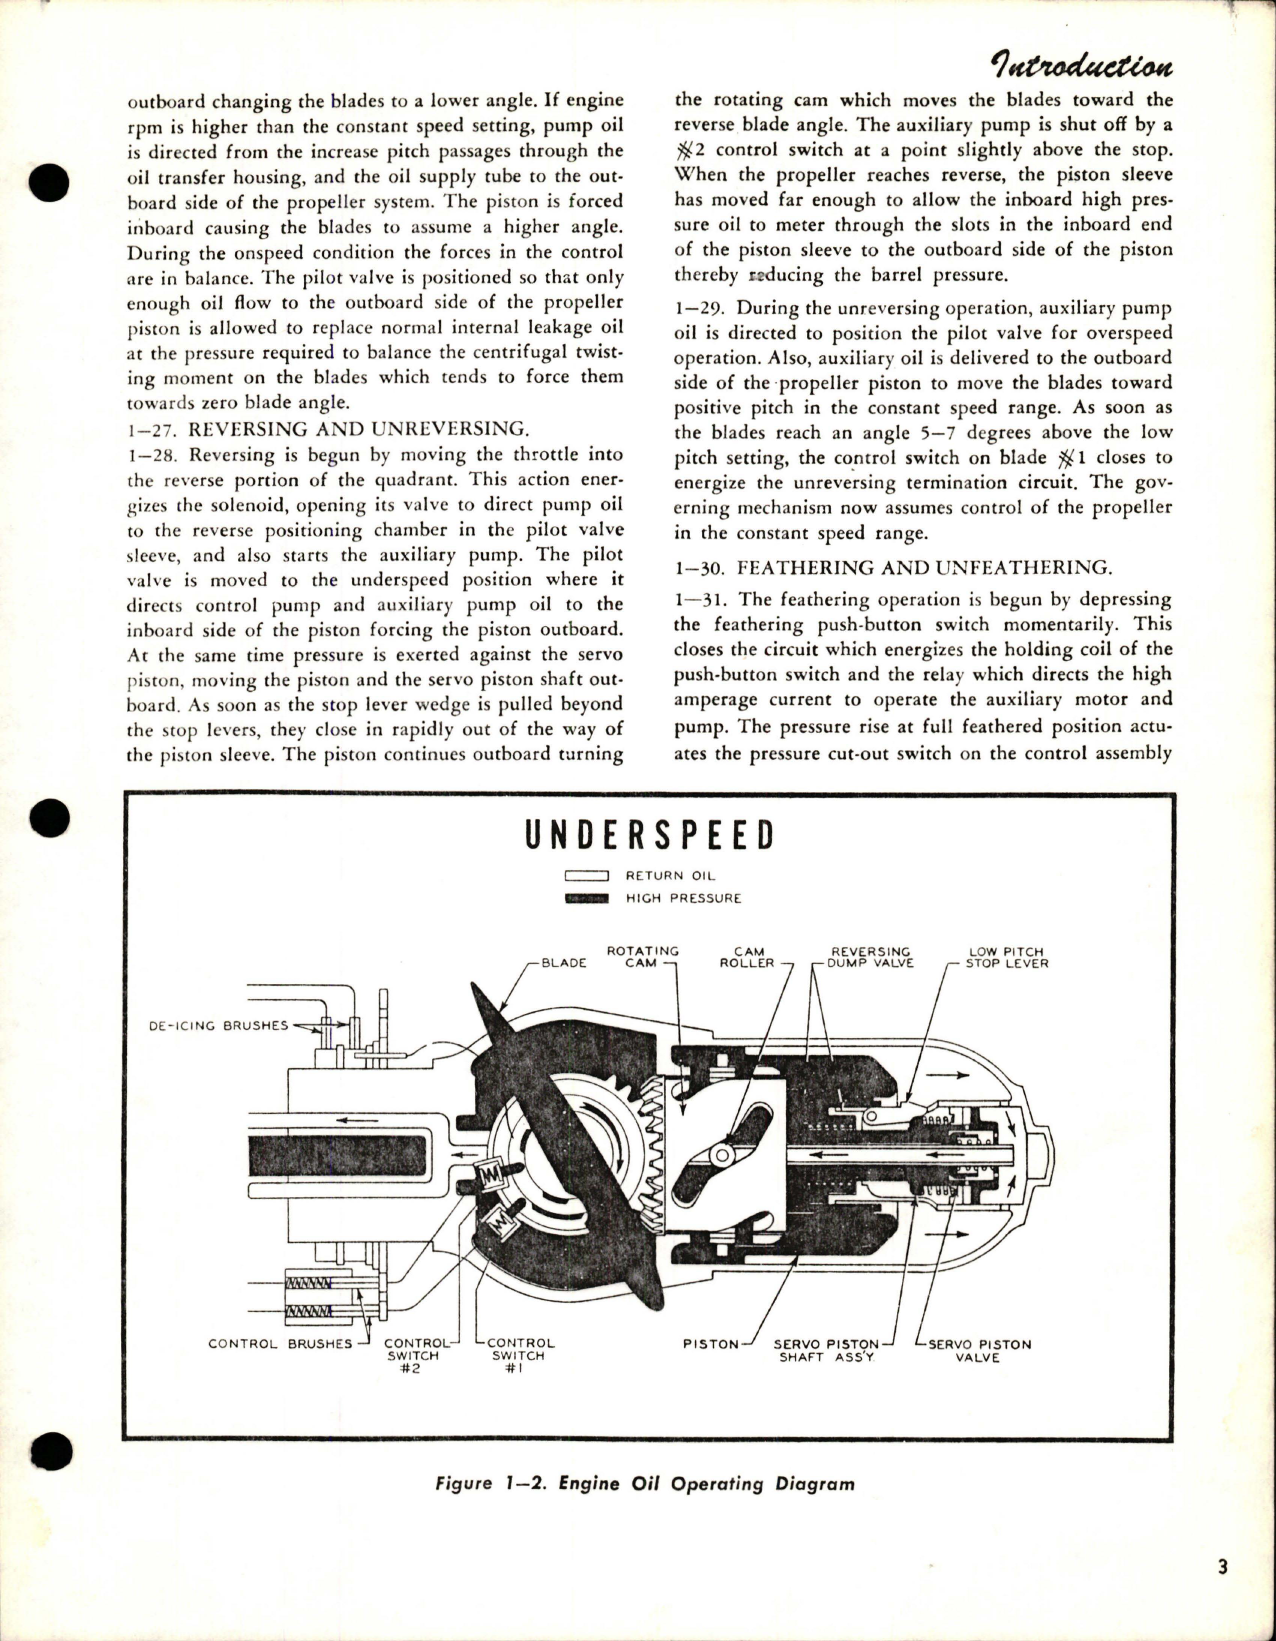 Sample page 9 from AirCorps Library document: Overhaul Manual for Hydromatic Reversing Propellers - Model 43E60